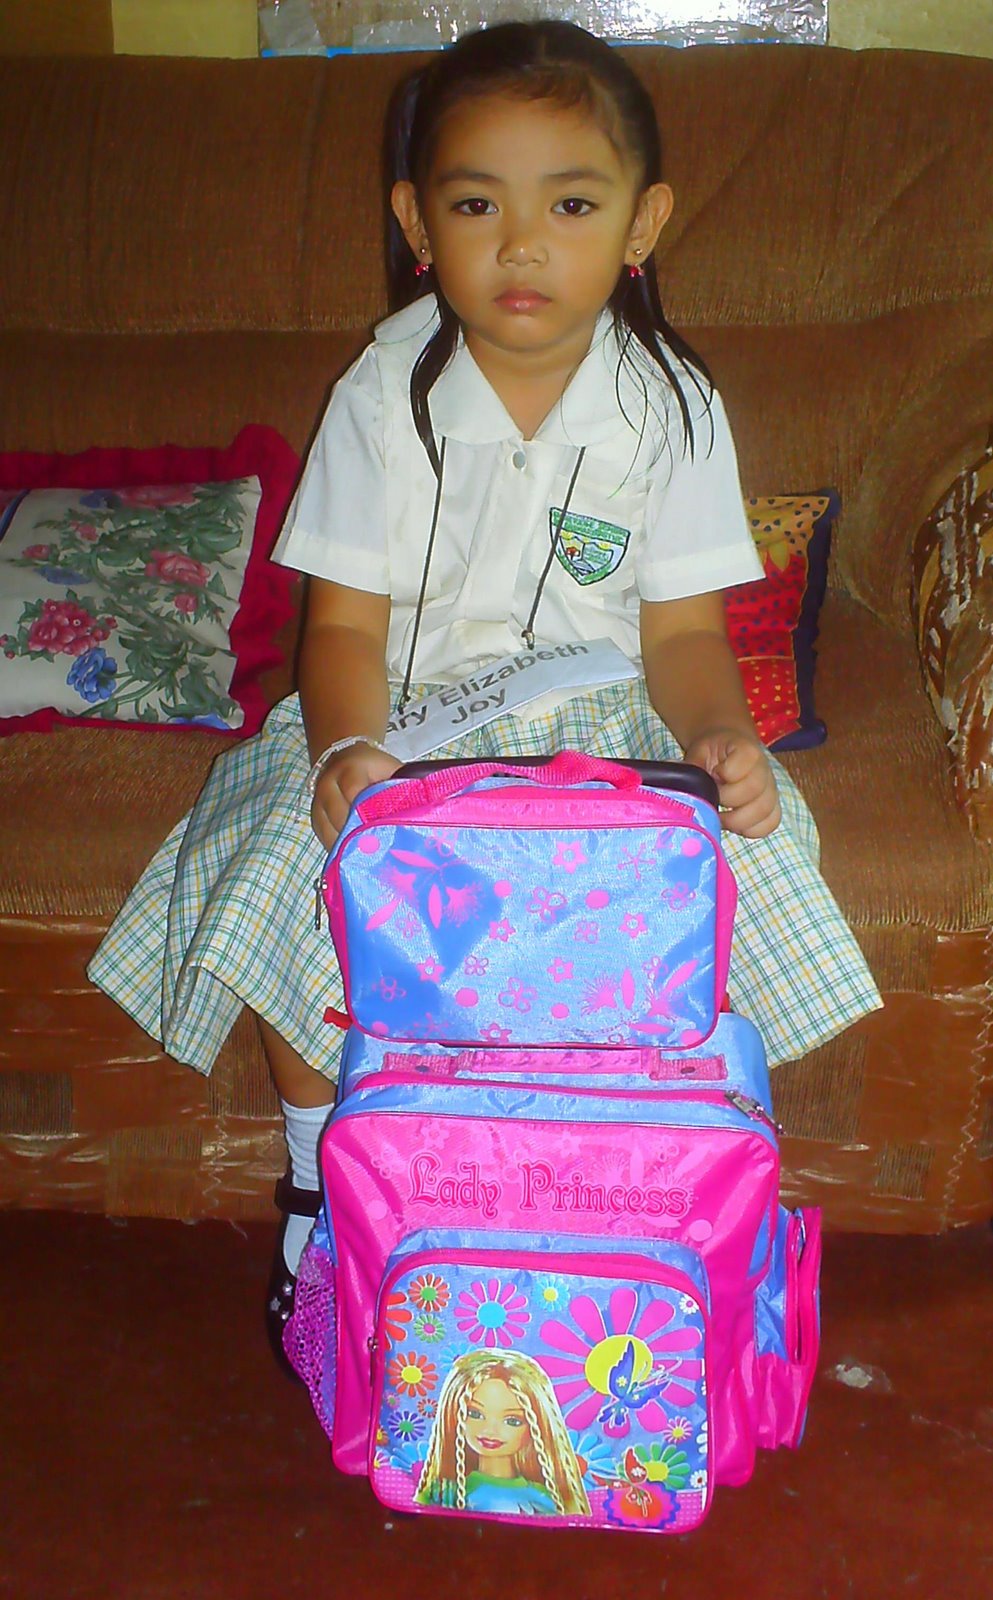 [Joy+with+her+new+bag+and+new+uniform.JPG]